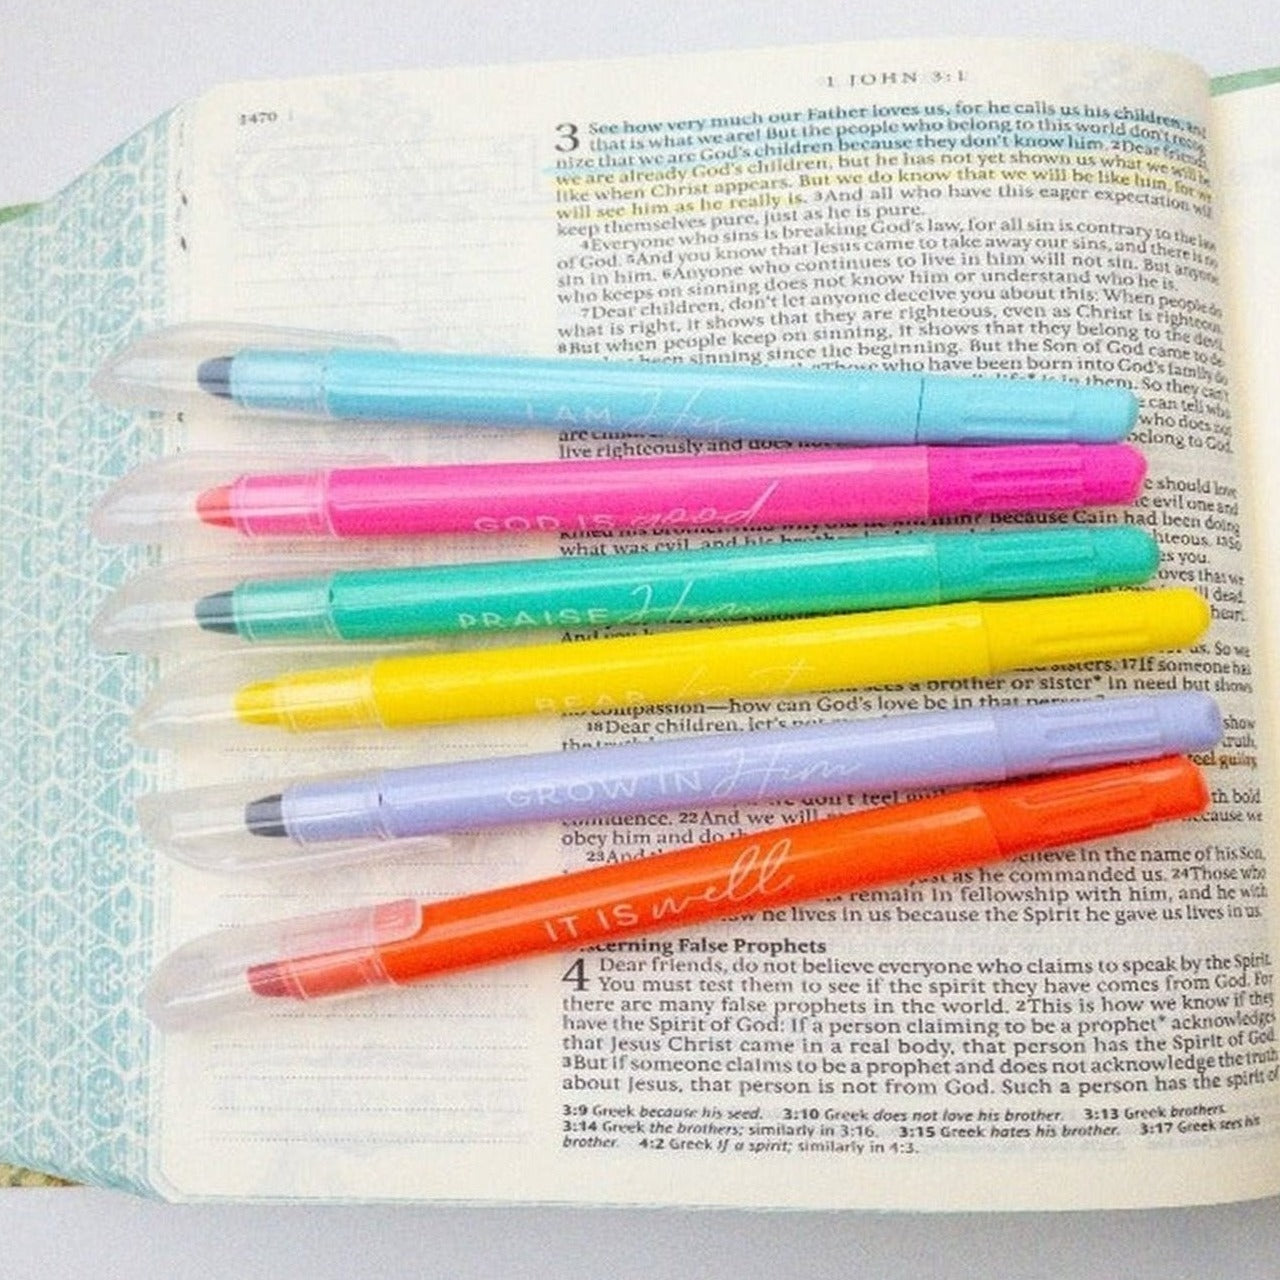 Bible Highlighters (set of 6)